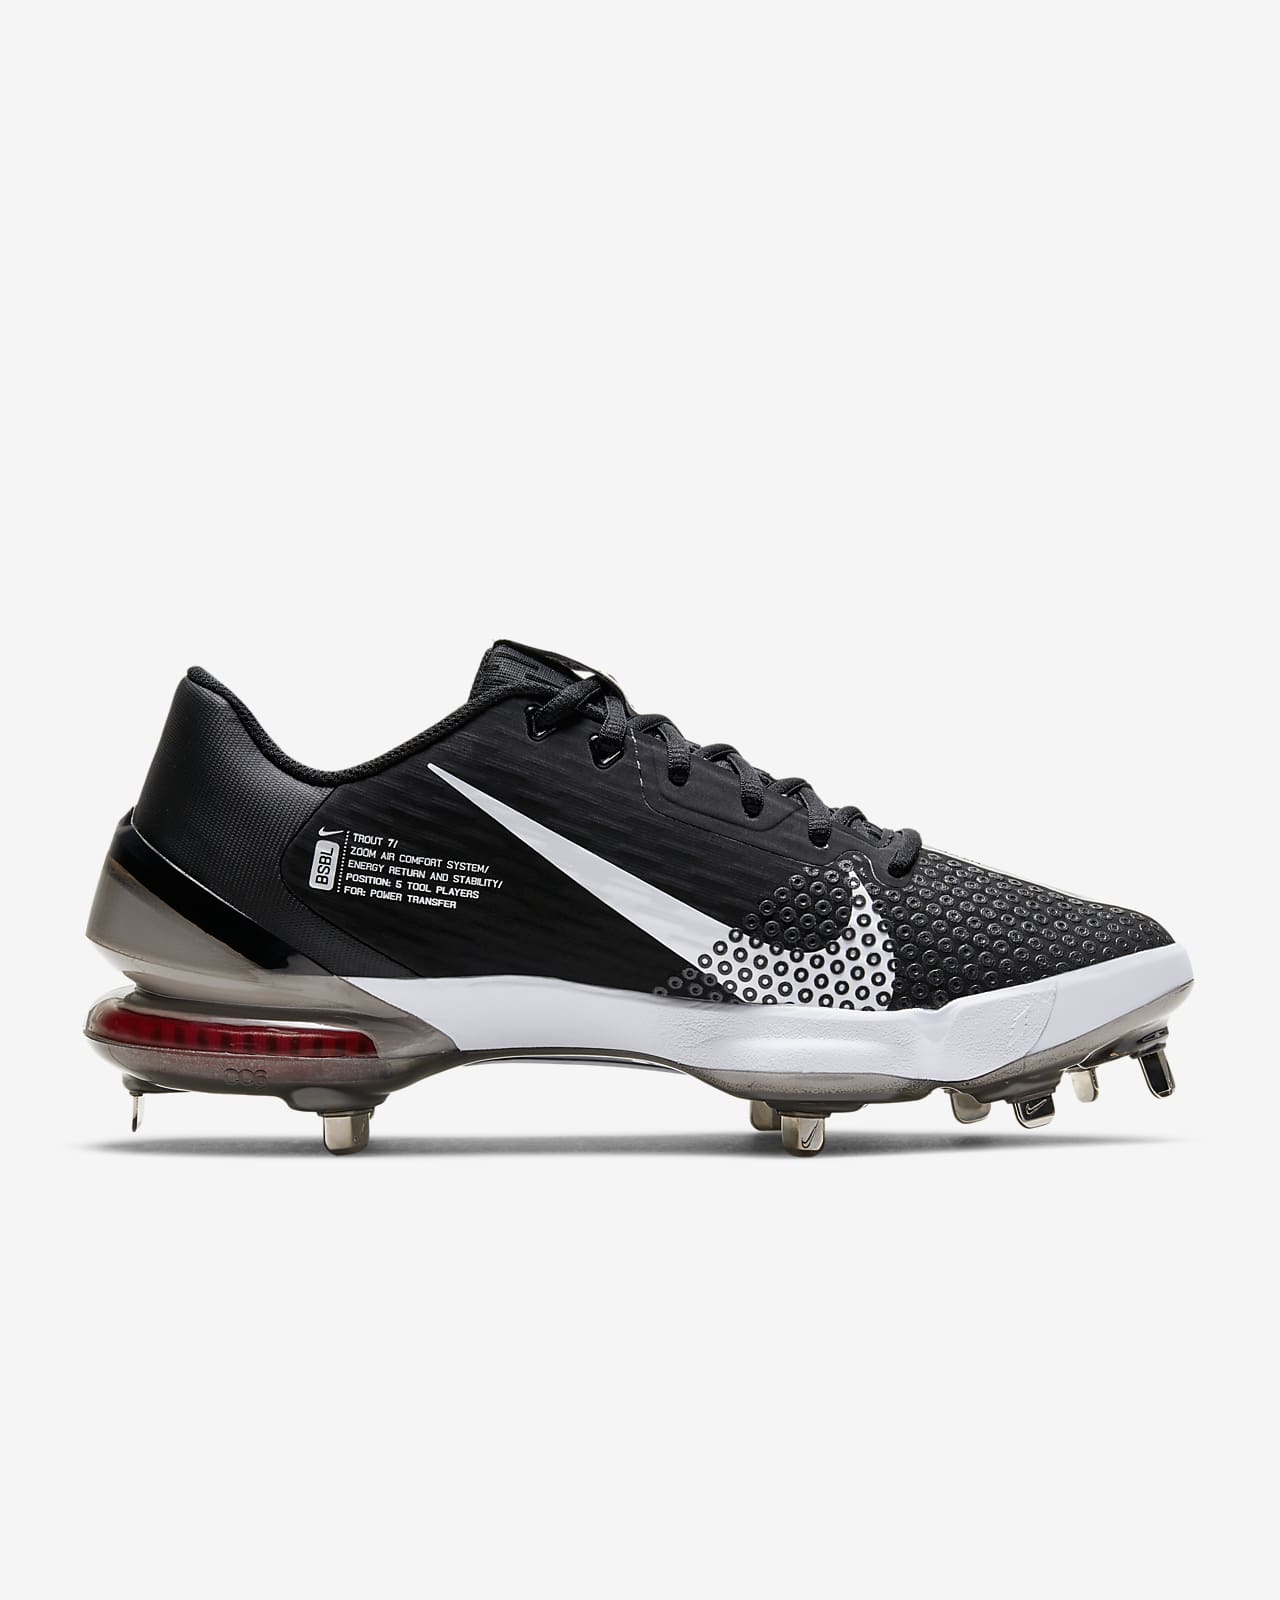 nike force zoom trout 5 men's mid metal baseball cleats - white/metallic red bronze/pure platinum